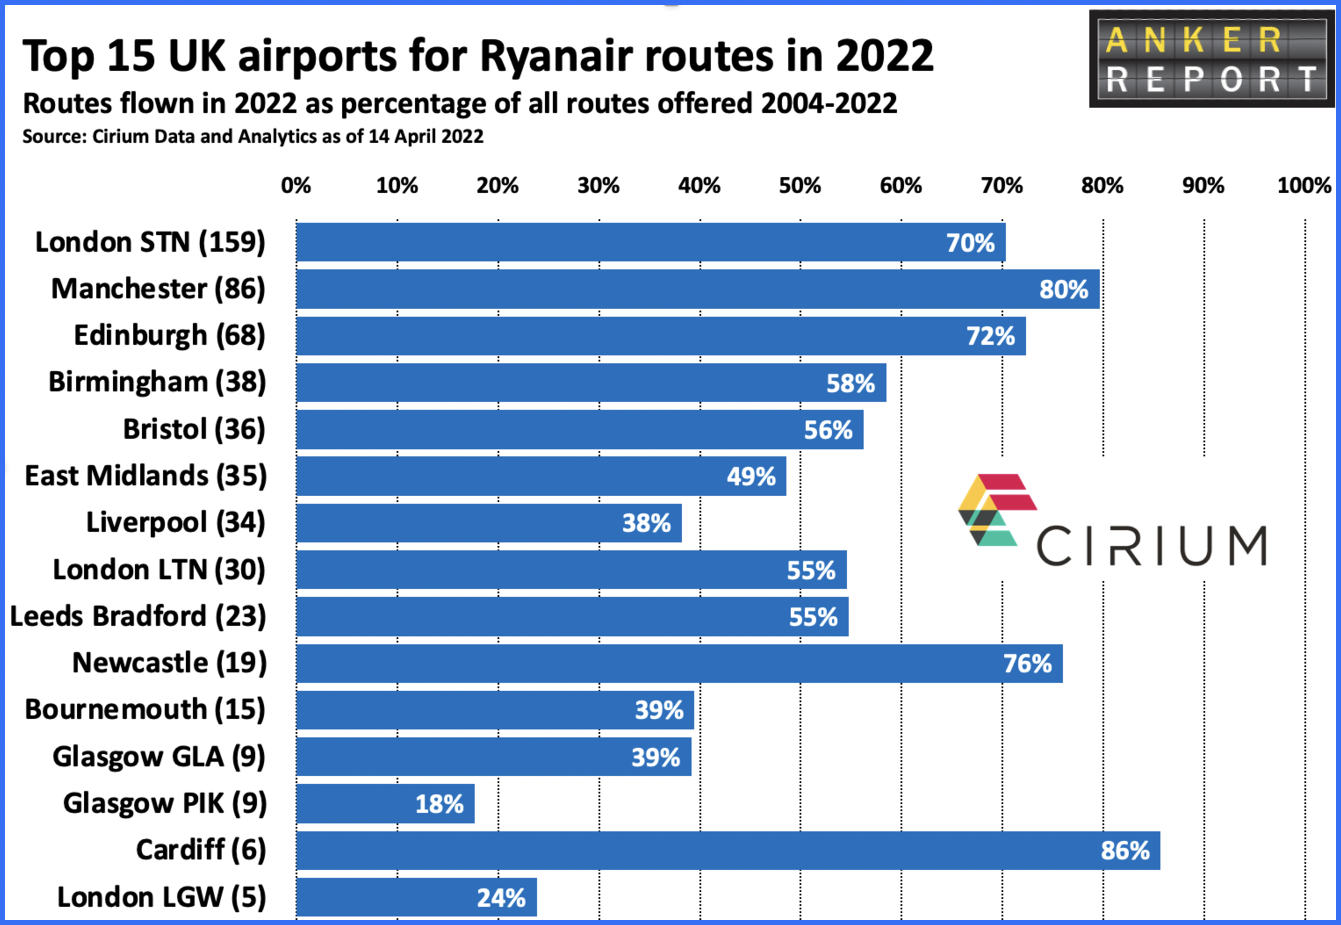 Top 15 UK airports for Ryanair routes in 2022